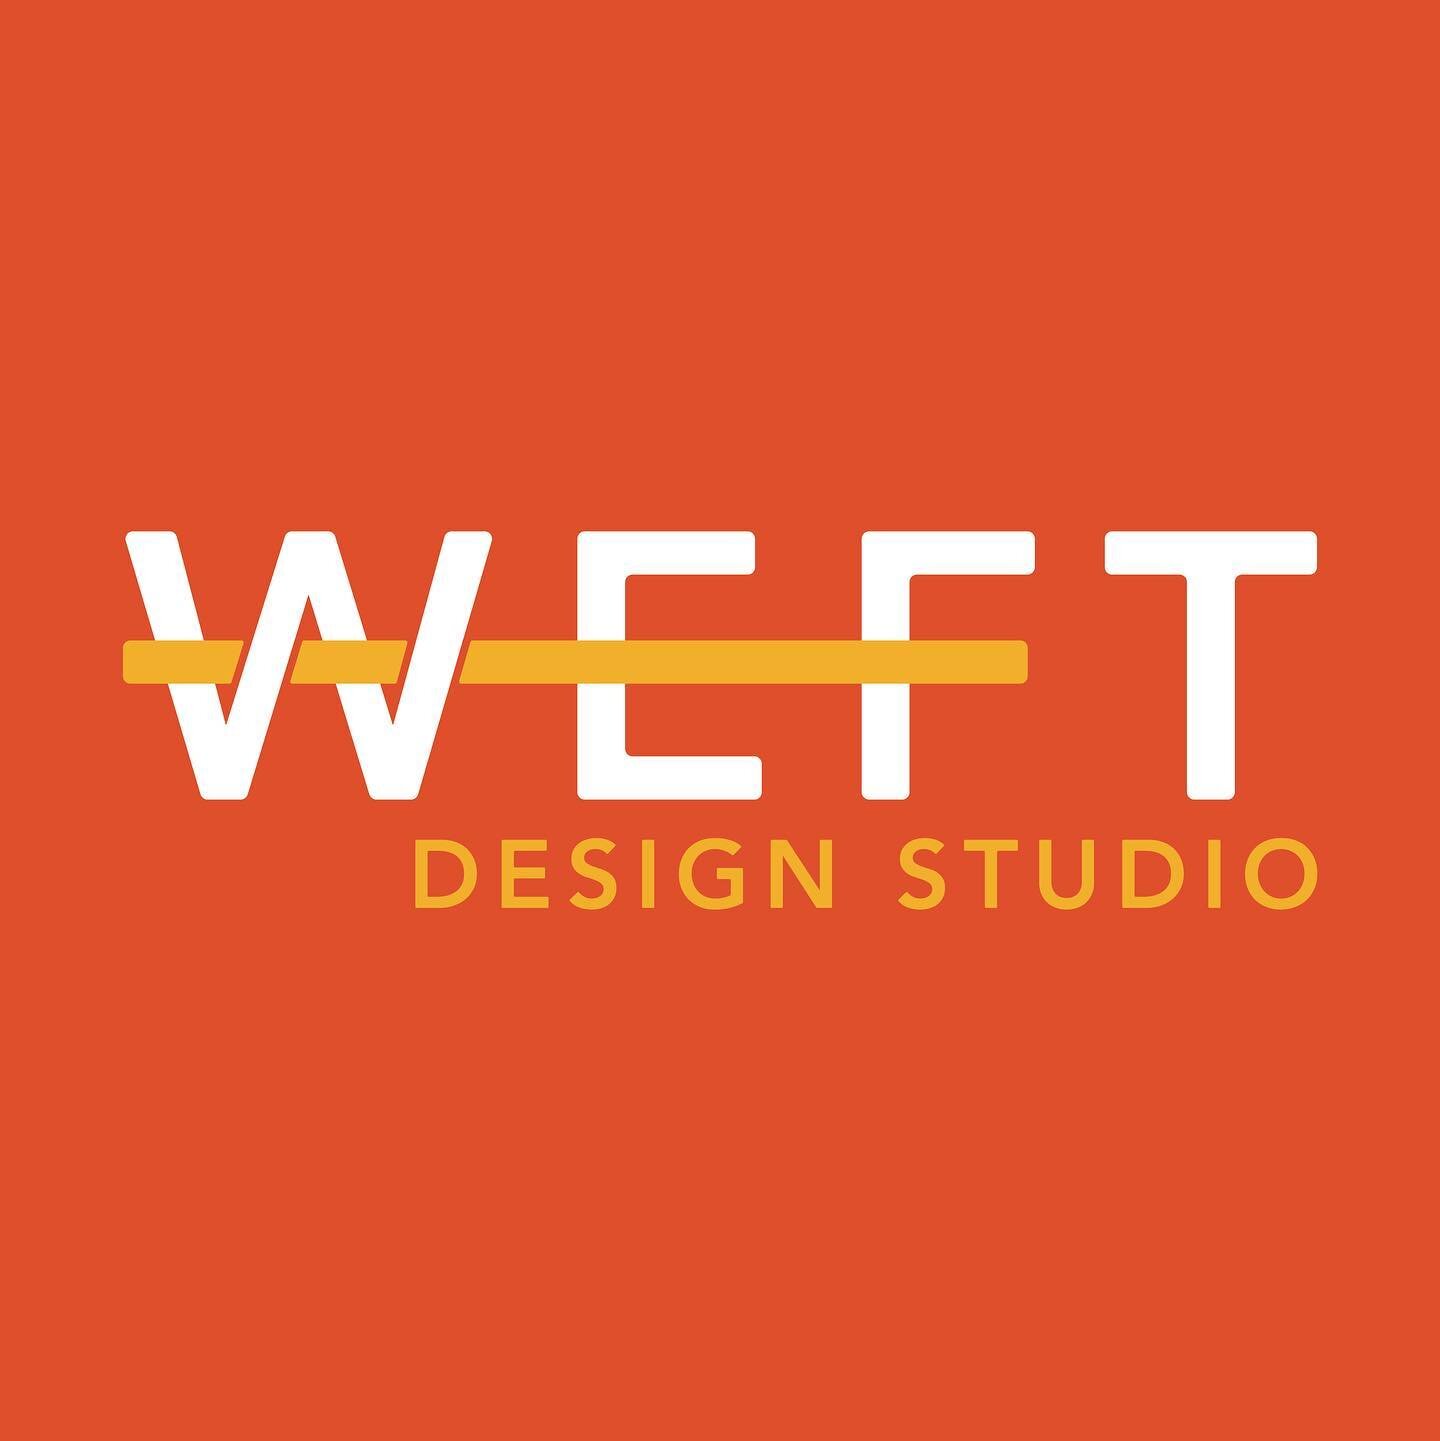 Introducing Weft Design!

This has been in the works for the last year or so, but the last few months I&rsquo;ve been full time building this business and more importantly designing + developing some rad products. I&rsquo;m super excited to share the